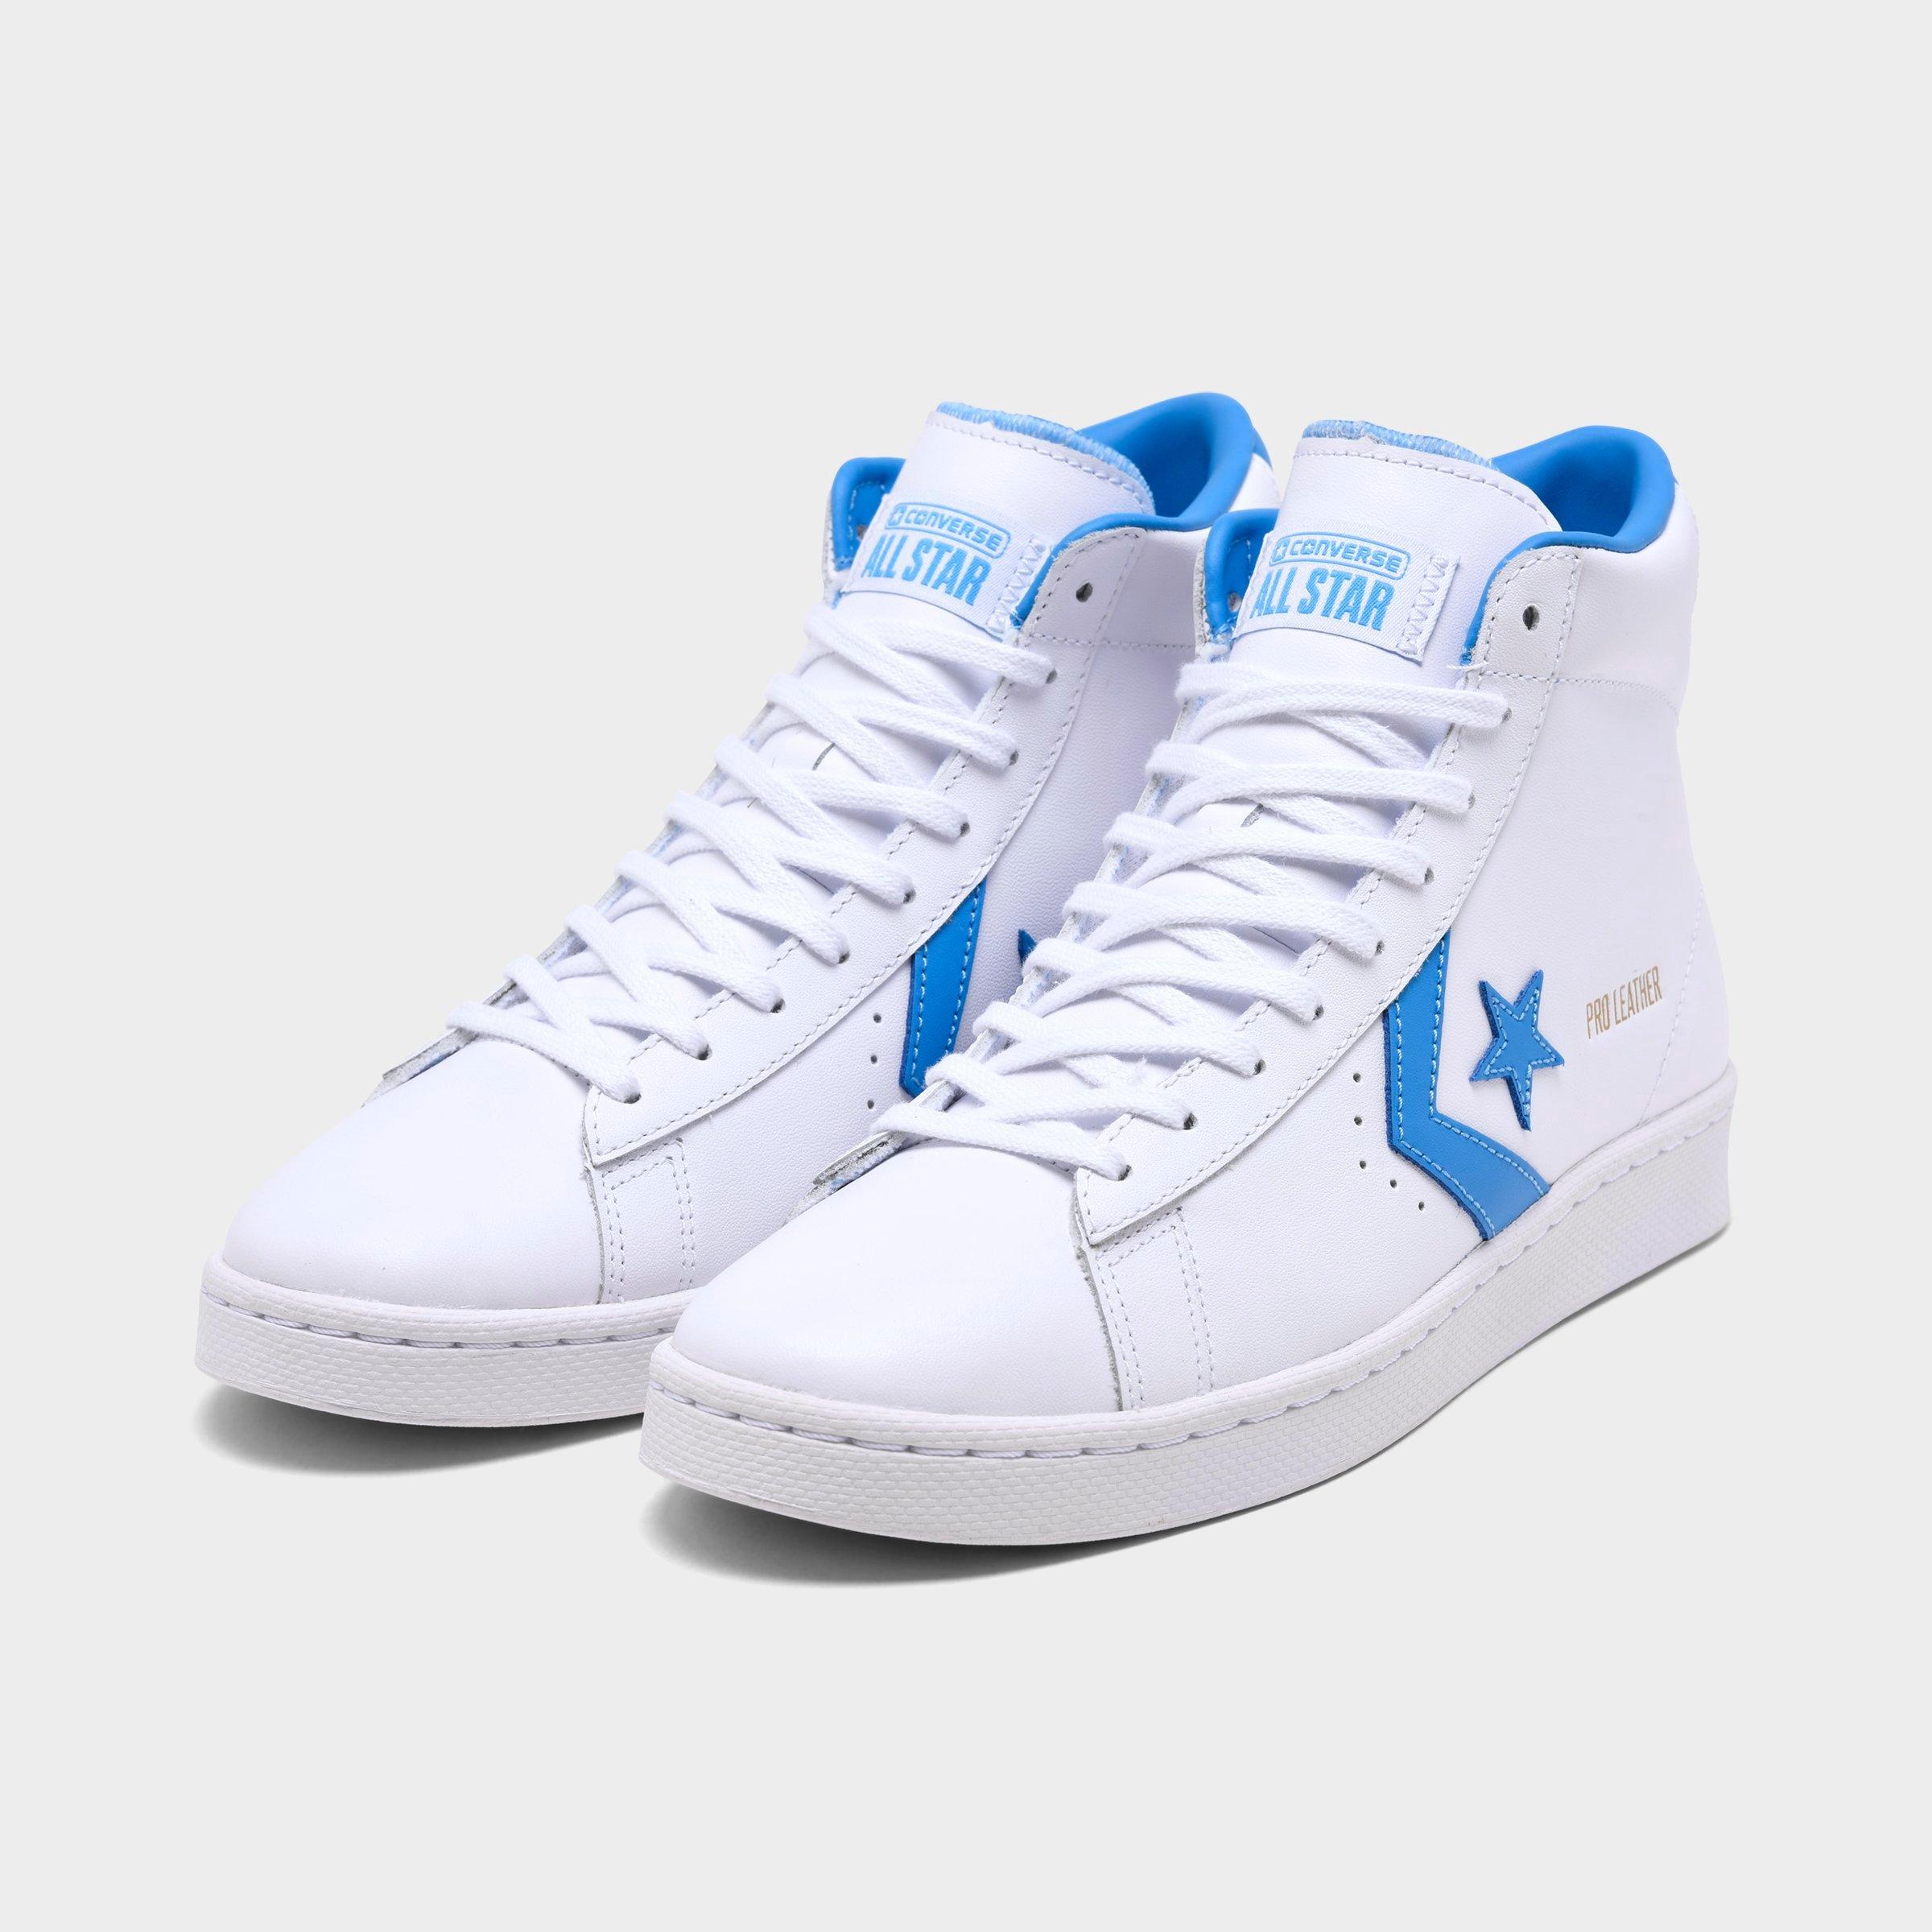 Men's Converse Pro Leather High Top 